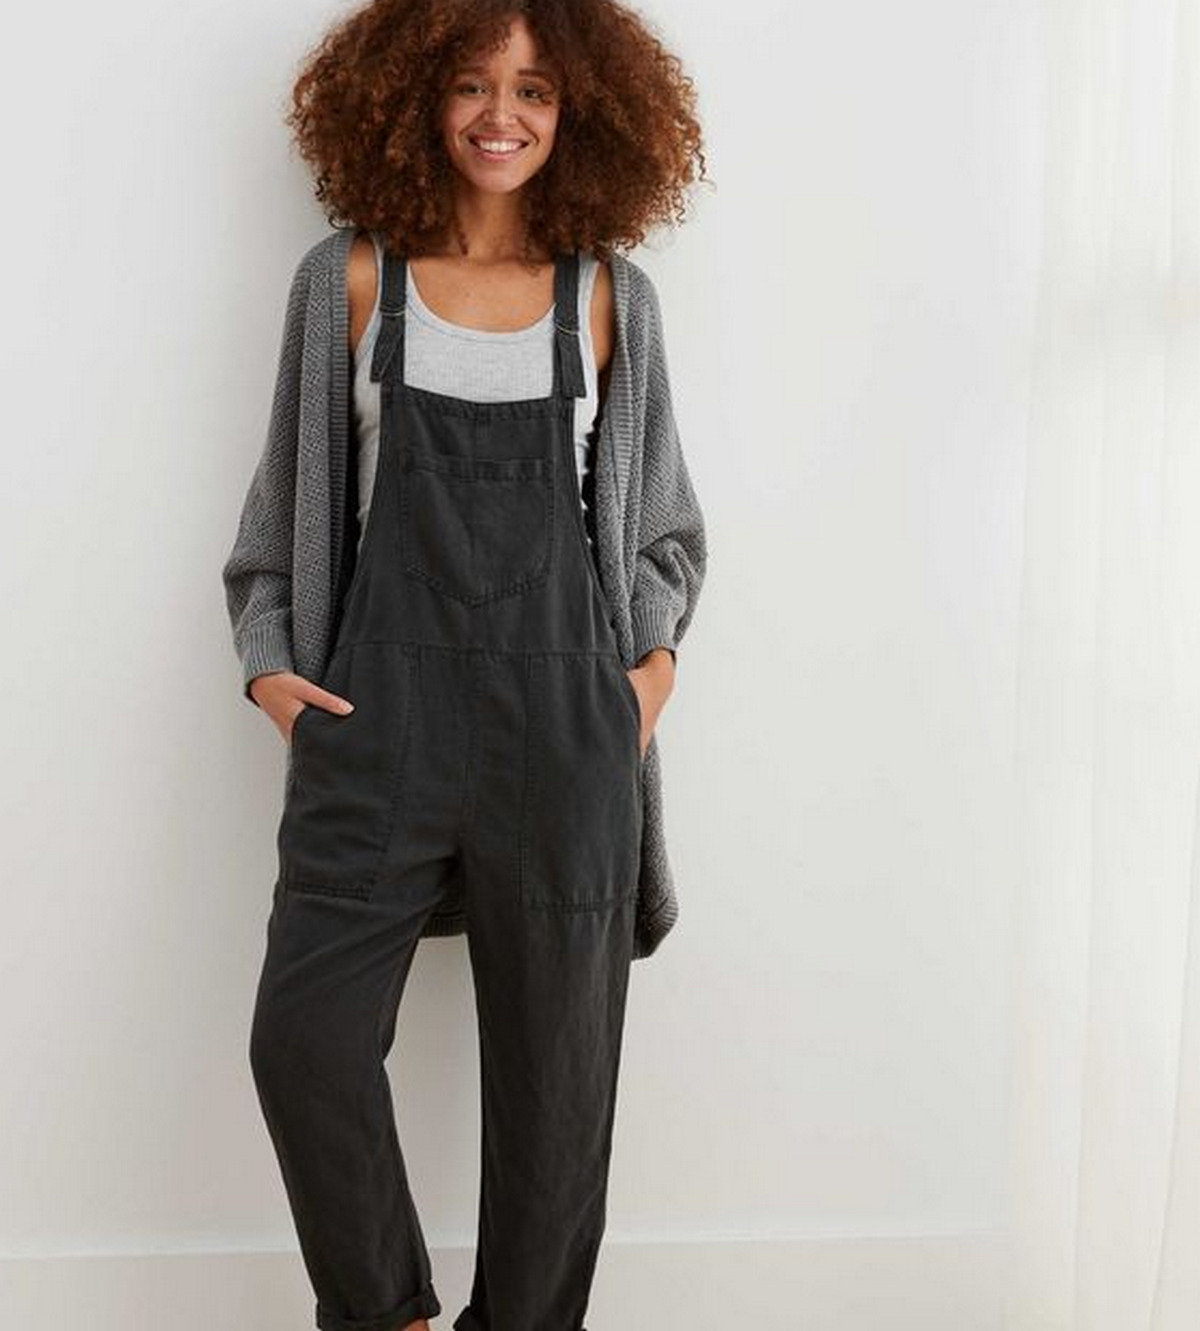 A White Tank Top And Grey Cardigan With Black Overalls